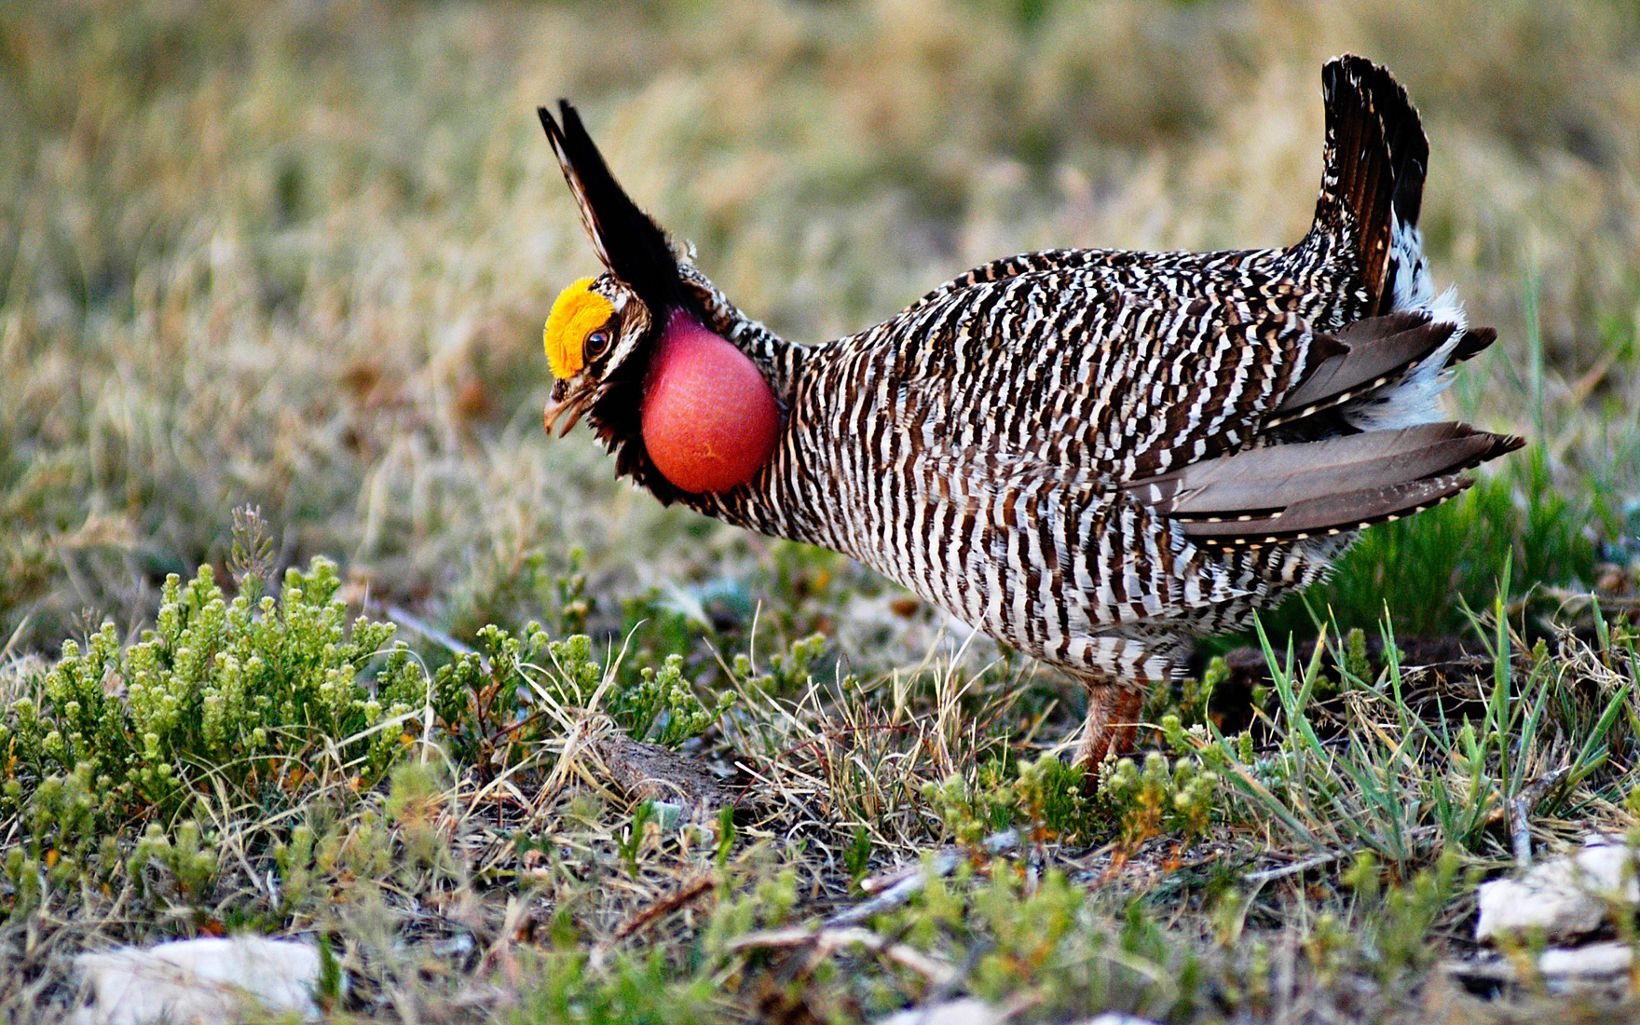 The Lesser Prairie Chicken at The Nature Conservancy's Milnesand Preserve in New Mexico.